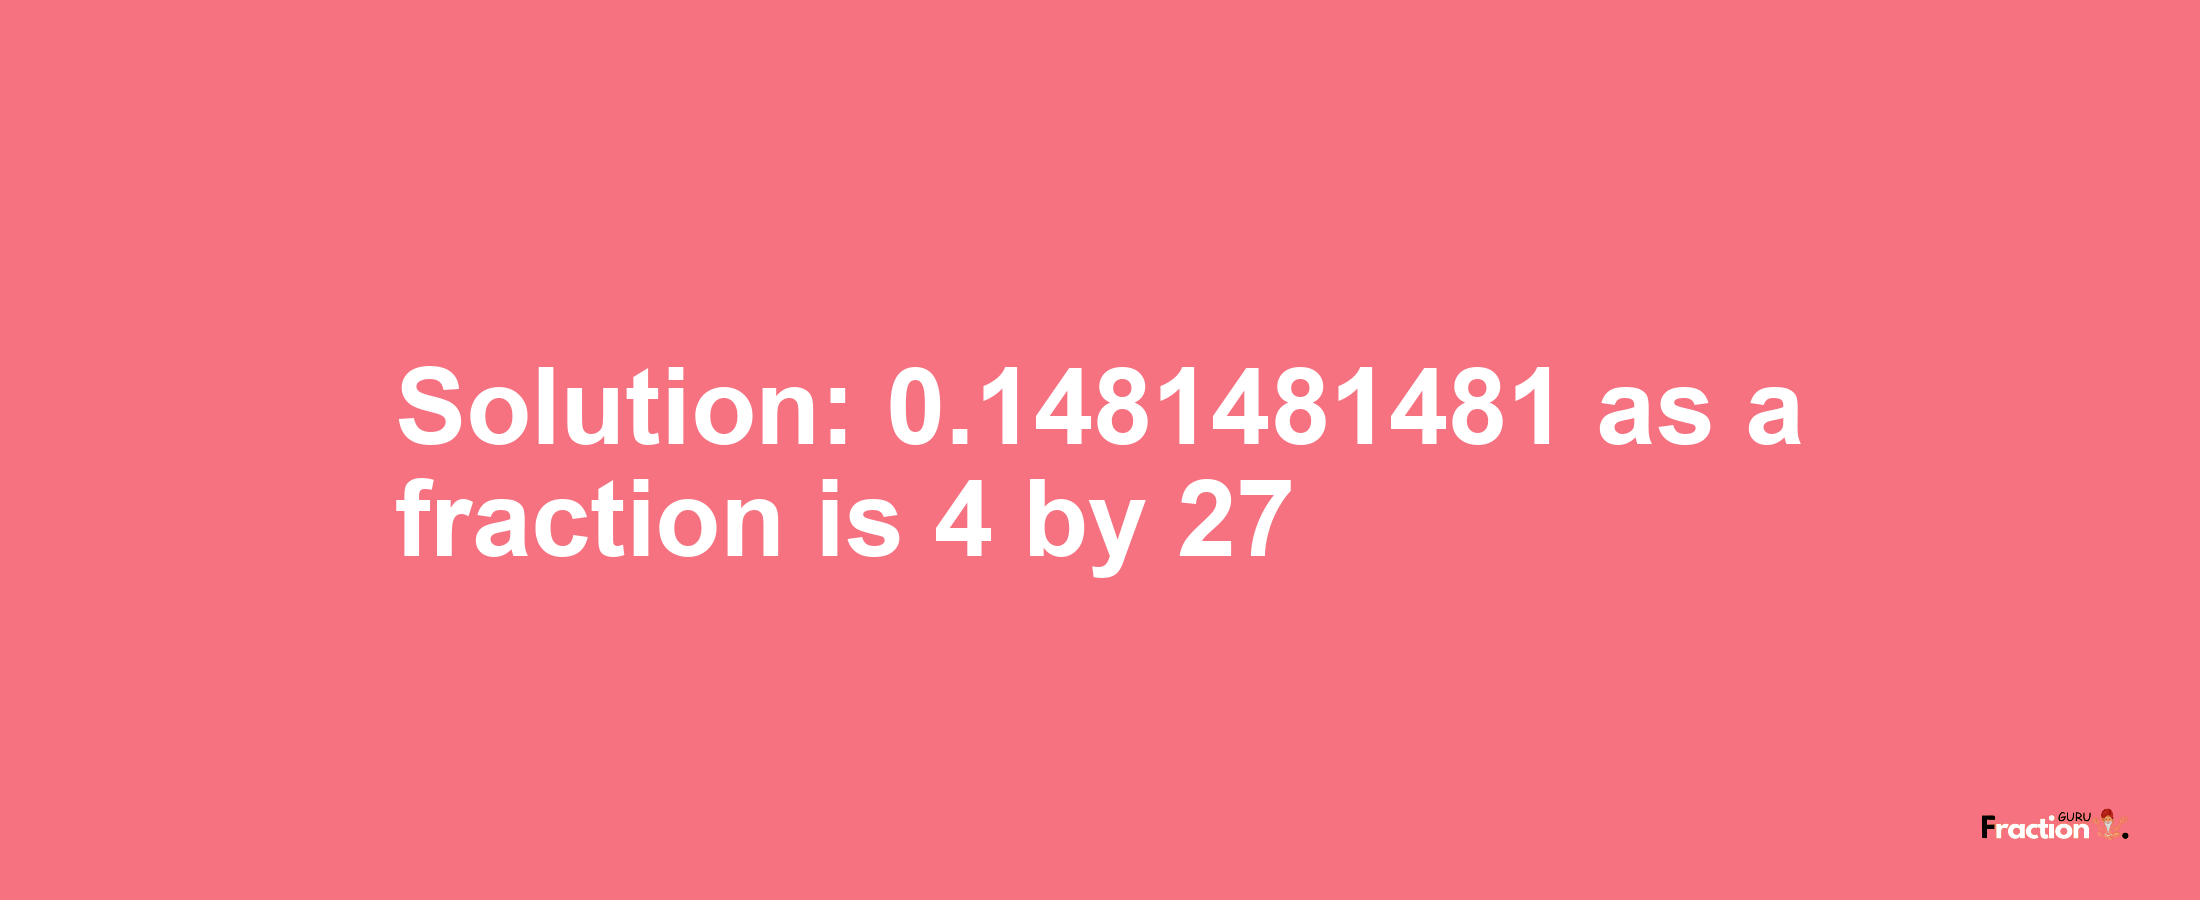 Solution:0.1481481481 as a fraction is 4/27